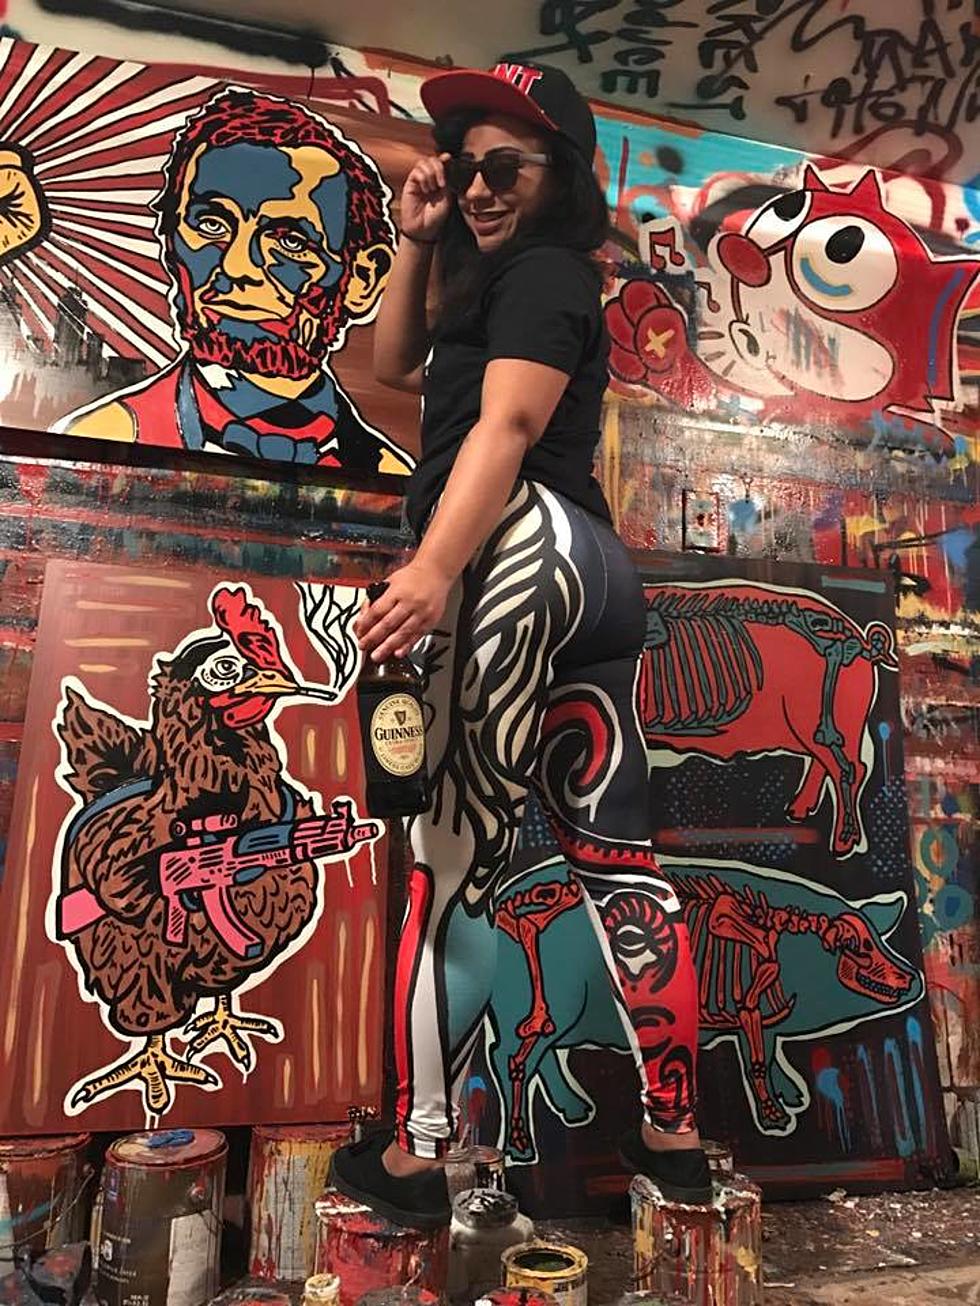 Flint Artist Turned His Painting Into Leggings And They&#8217;re Awesome [PHOTOS]